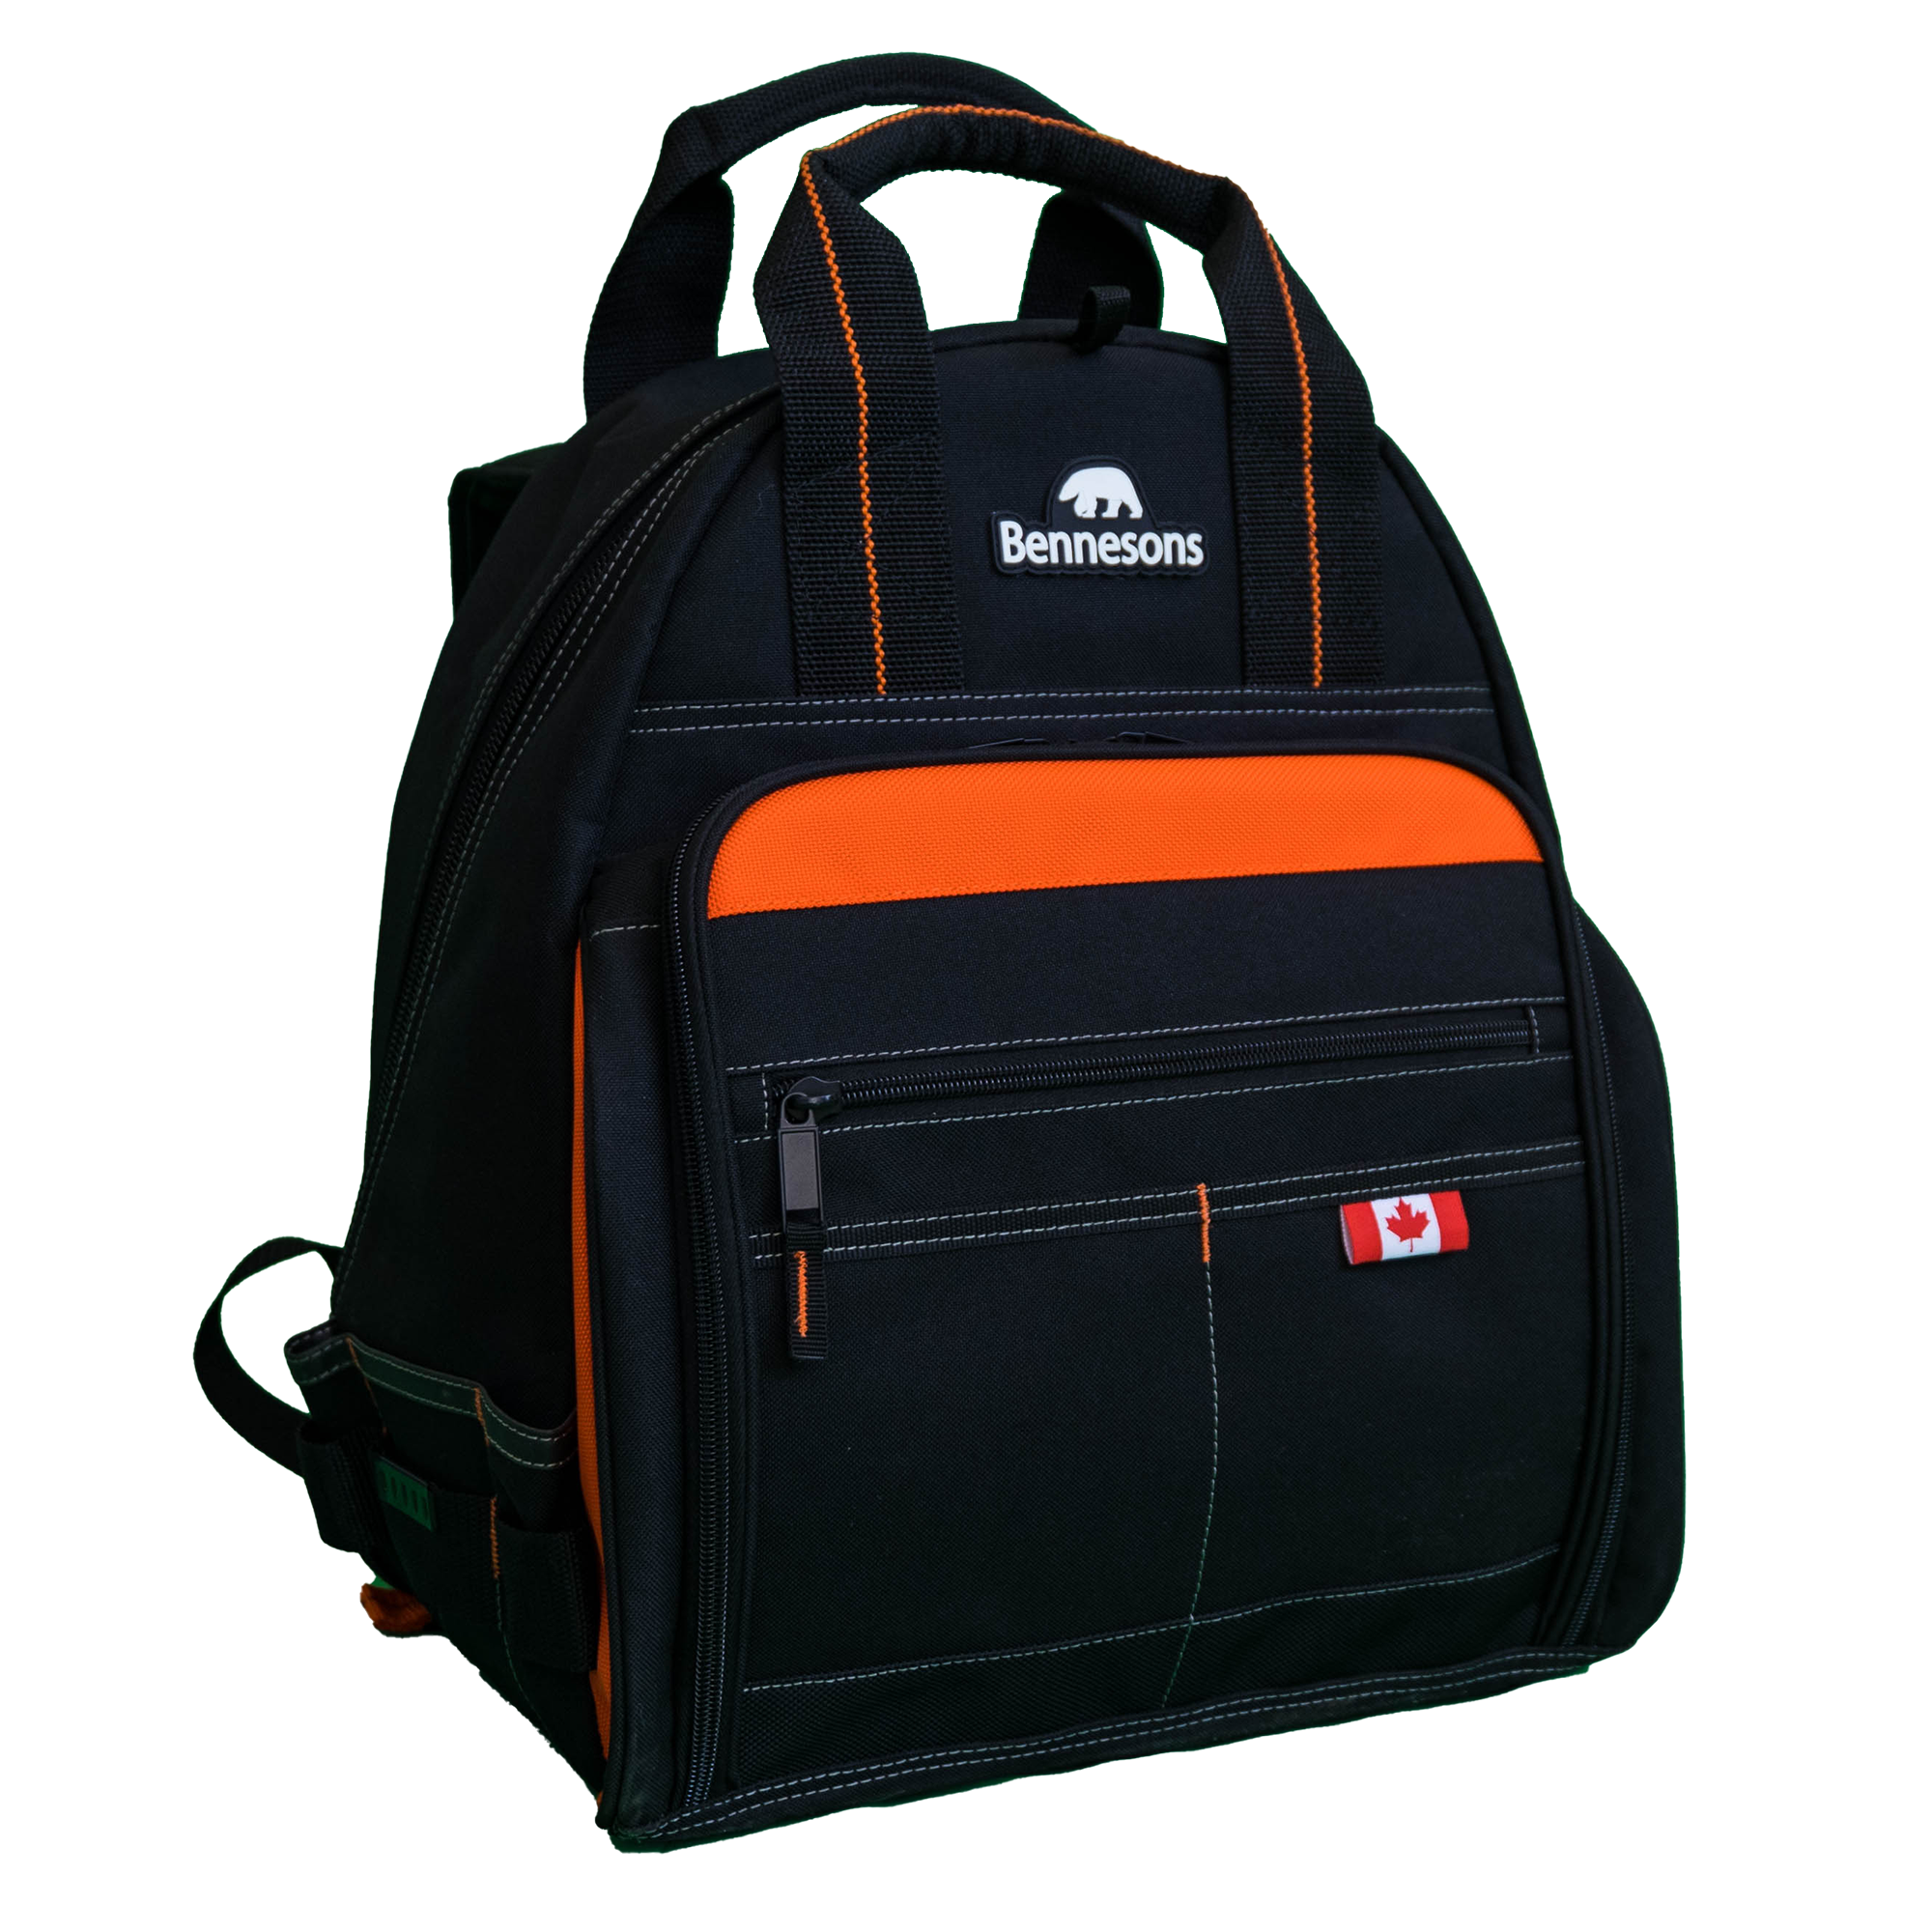 TO-1005 tool backpack